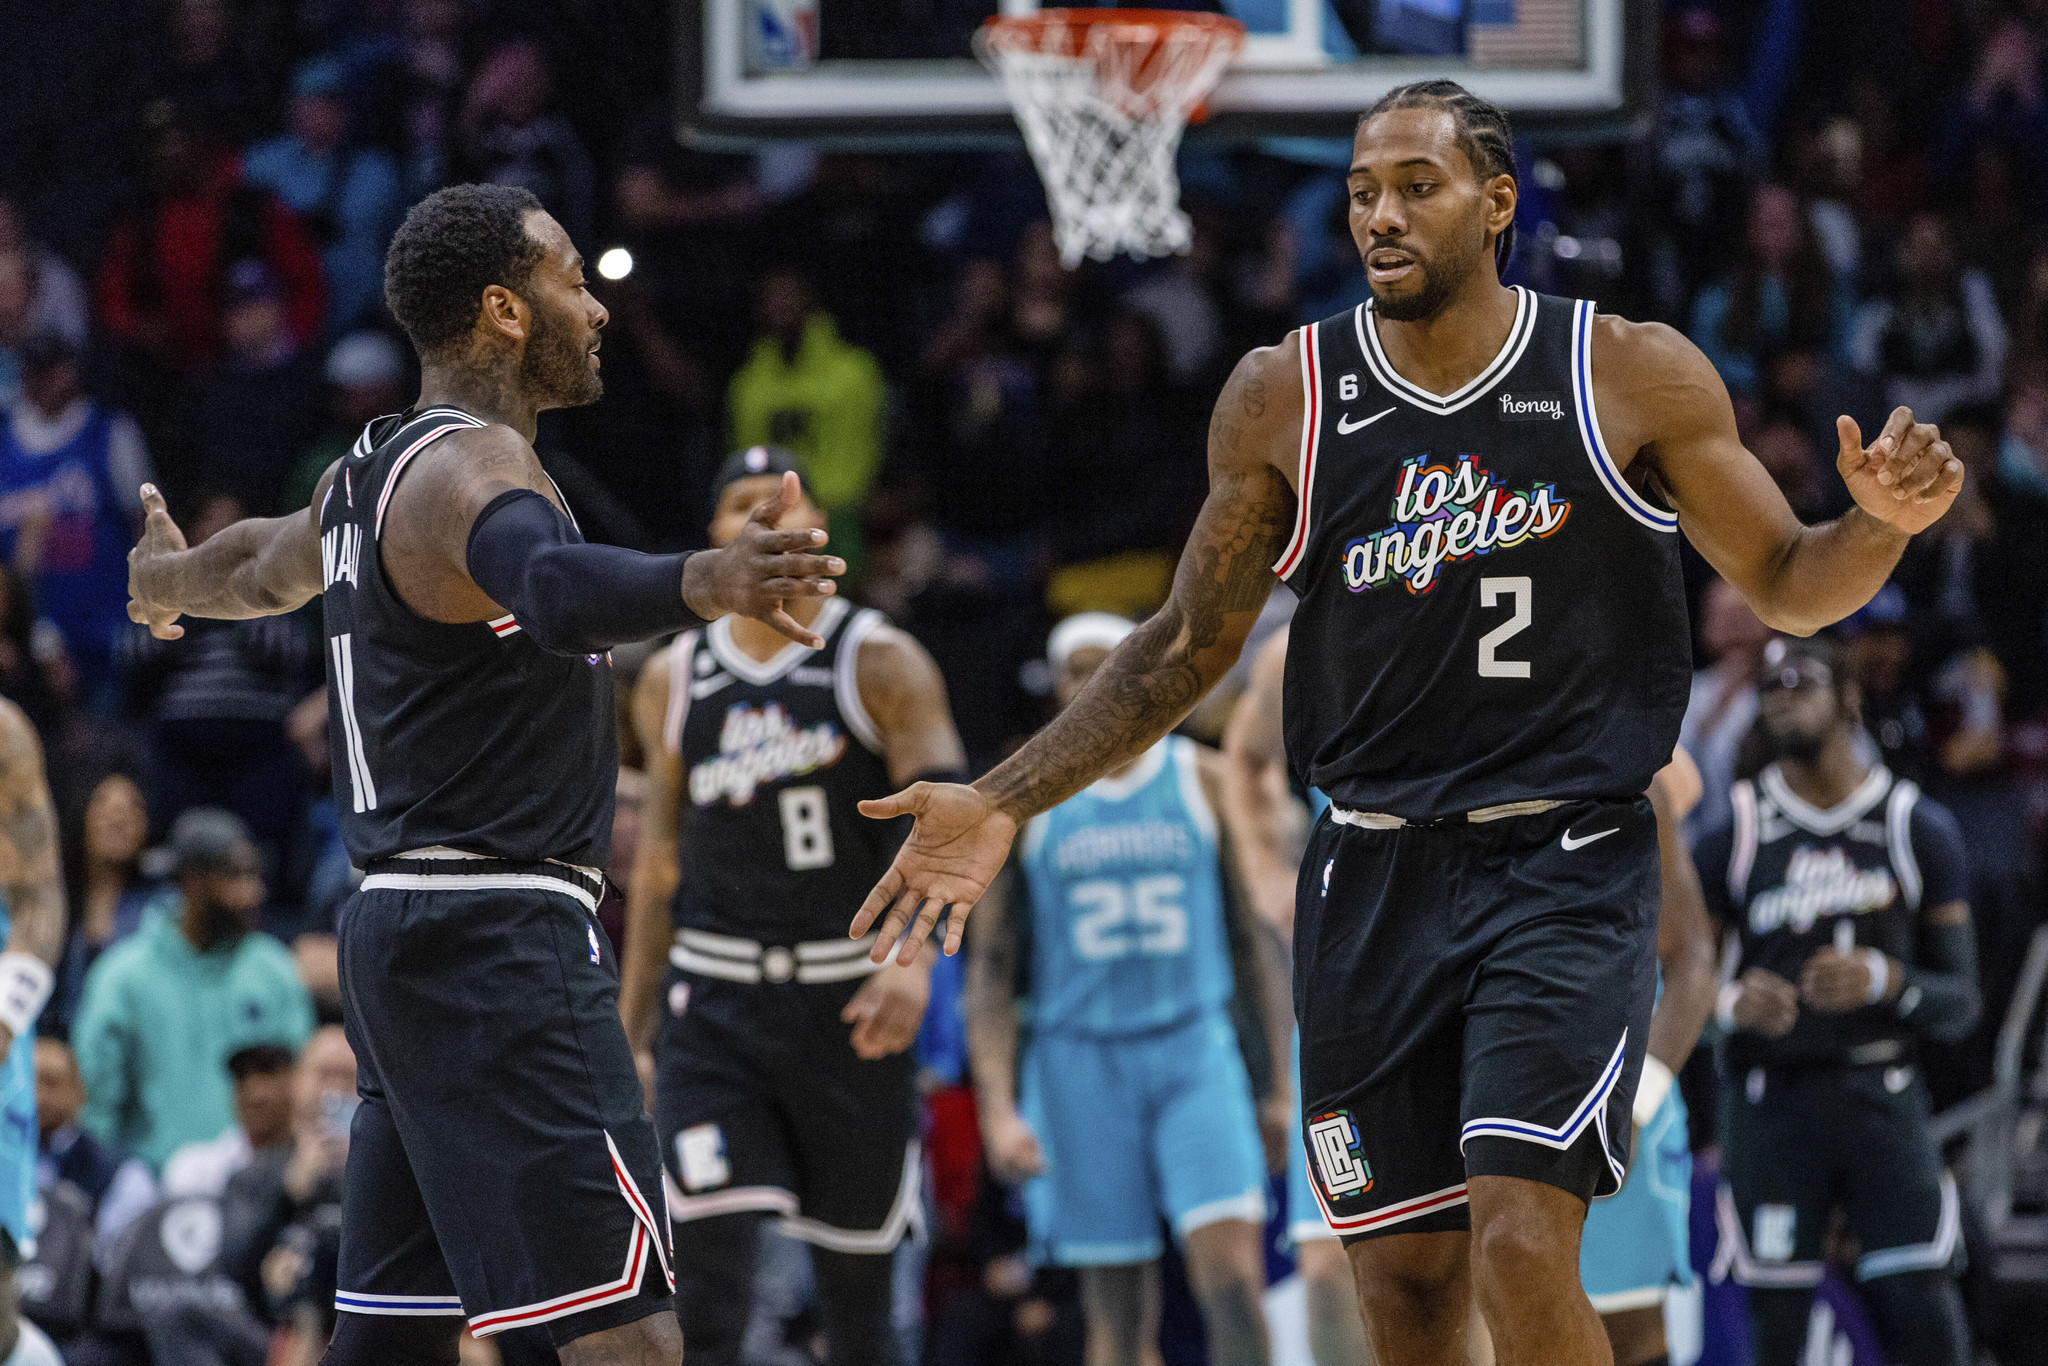 LA Clippers forward Kawhi Leonard shoots over Charlotte Hornets forward Jalen McDaniels to take the lead in the final seconds of the second half of an NBA basketball game on, Monday, Dec. 5, 2022, in Charlotte, N.C.